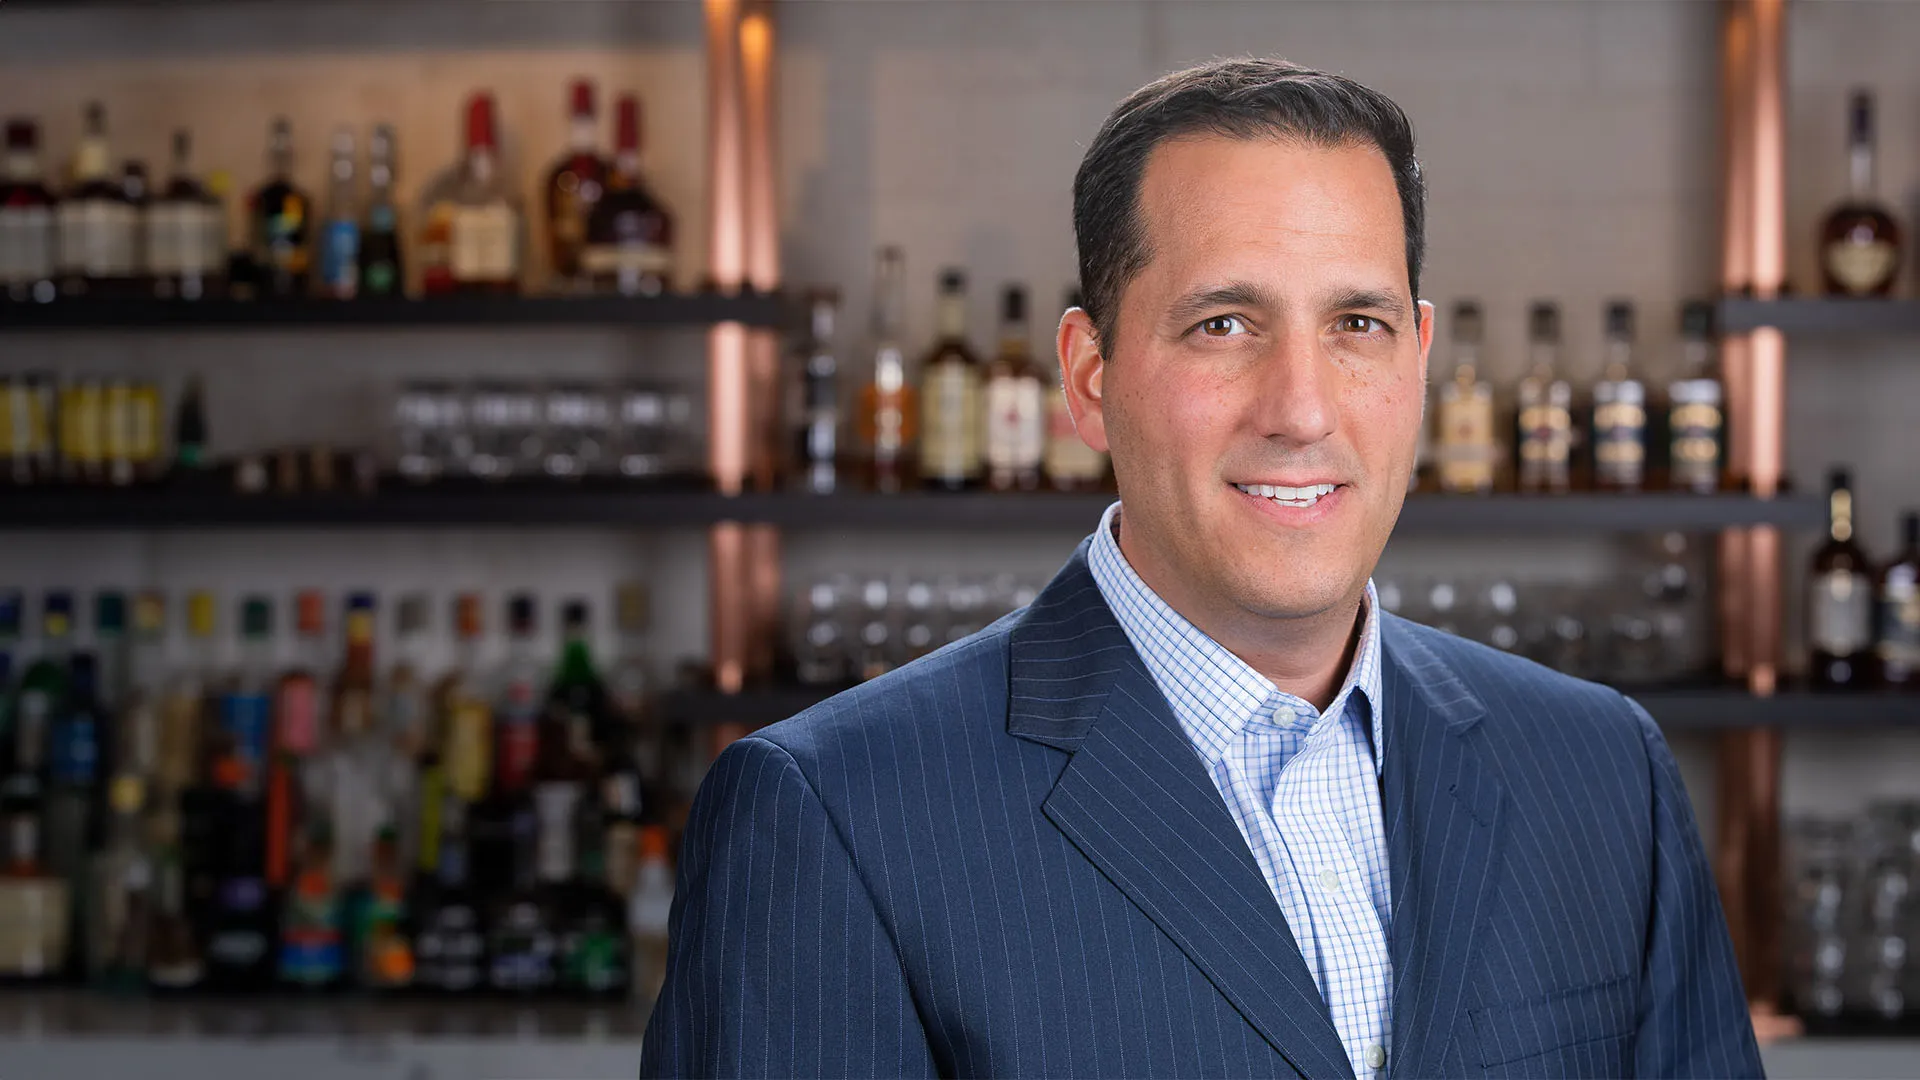 carlo coppola appointed global leader of the james b beam distilling co brand house